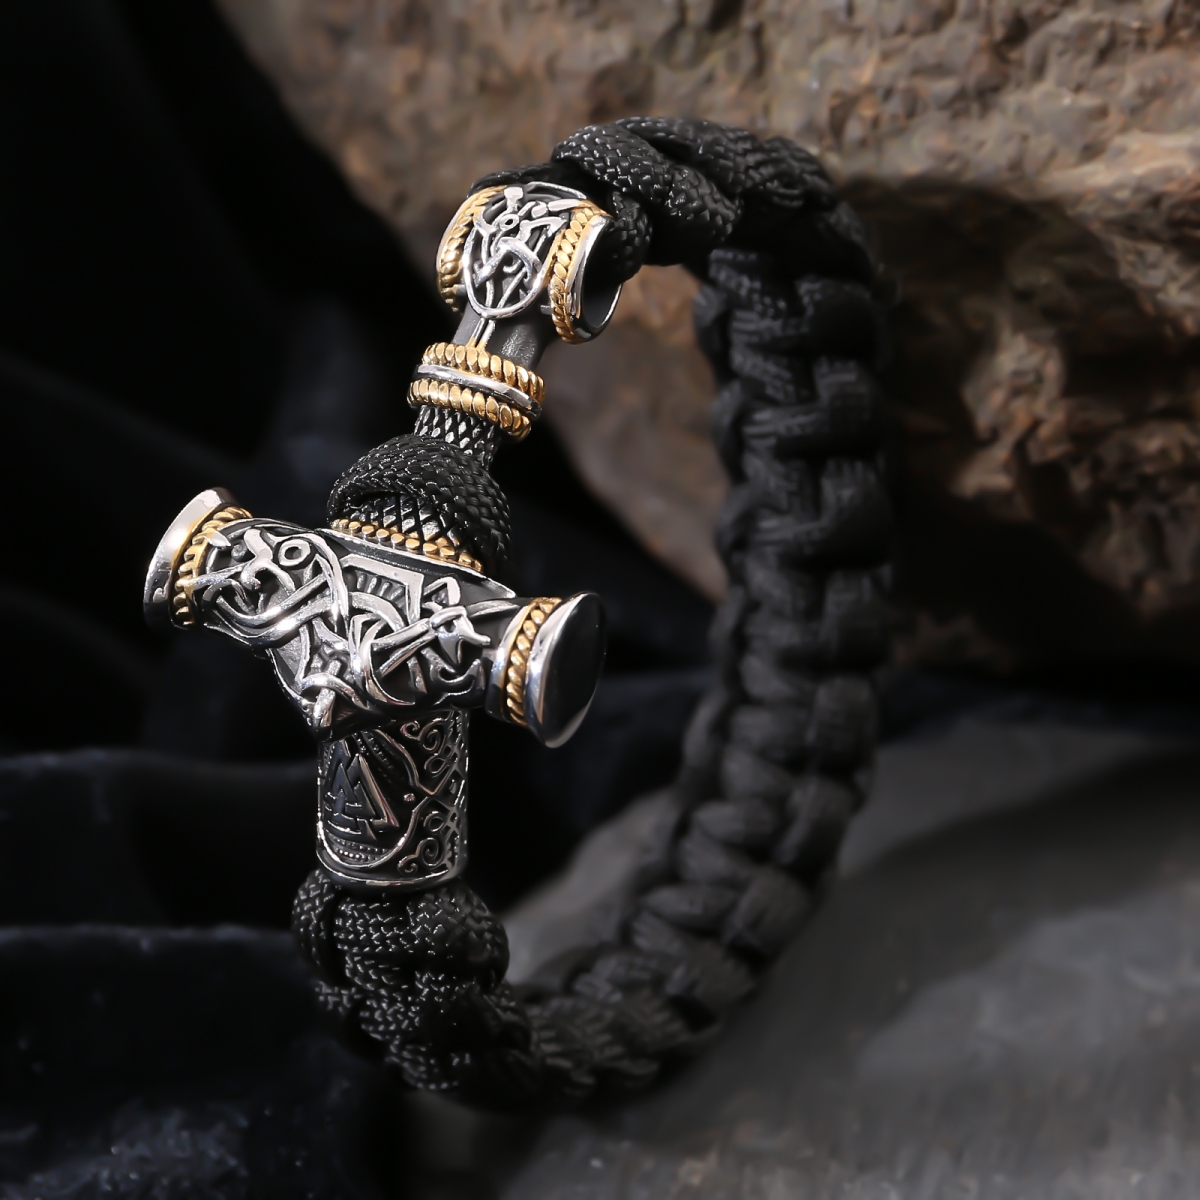 Viking jewelry gifts for men bracelet Chinese manufacture-NORSECOLLECTION- Viking Jewelry,Viking Necklace,Viking Bracelet,Viking Rings,Viking Mugs,Viking Accessories,Viking Crafts